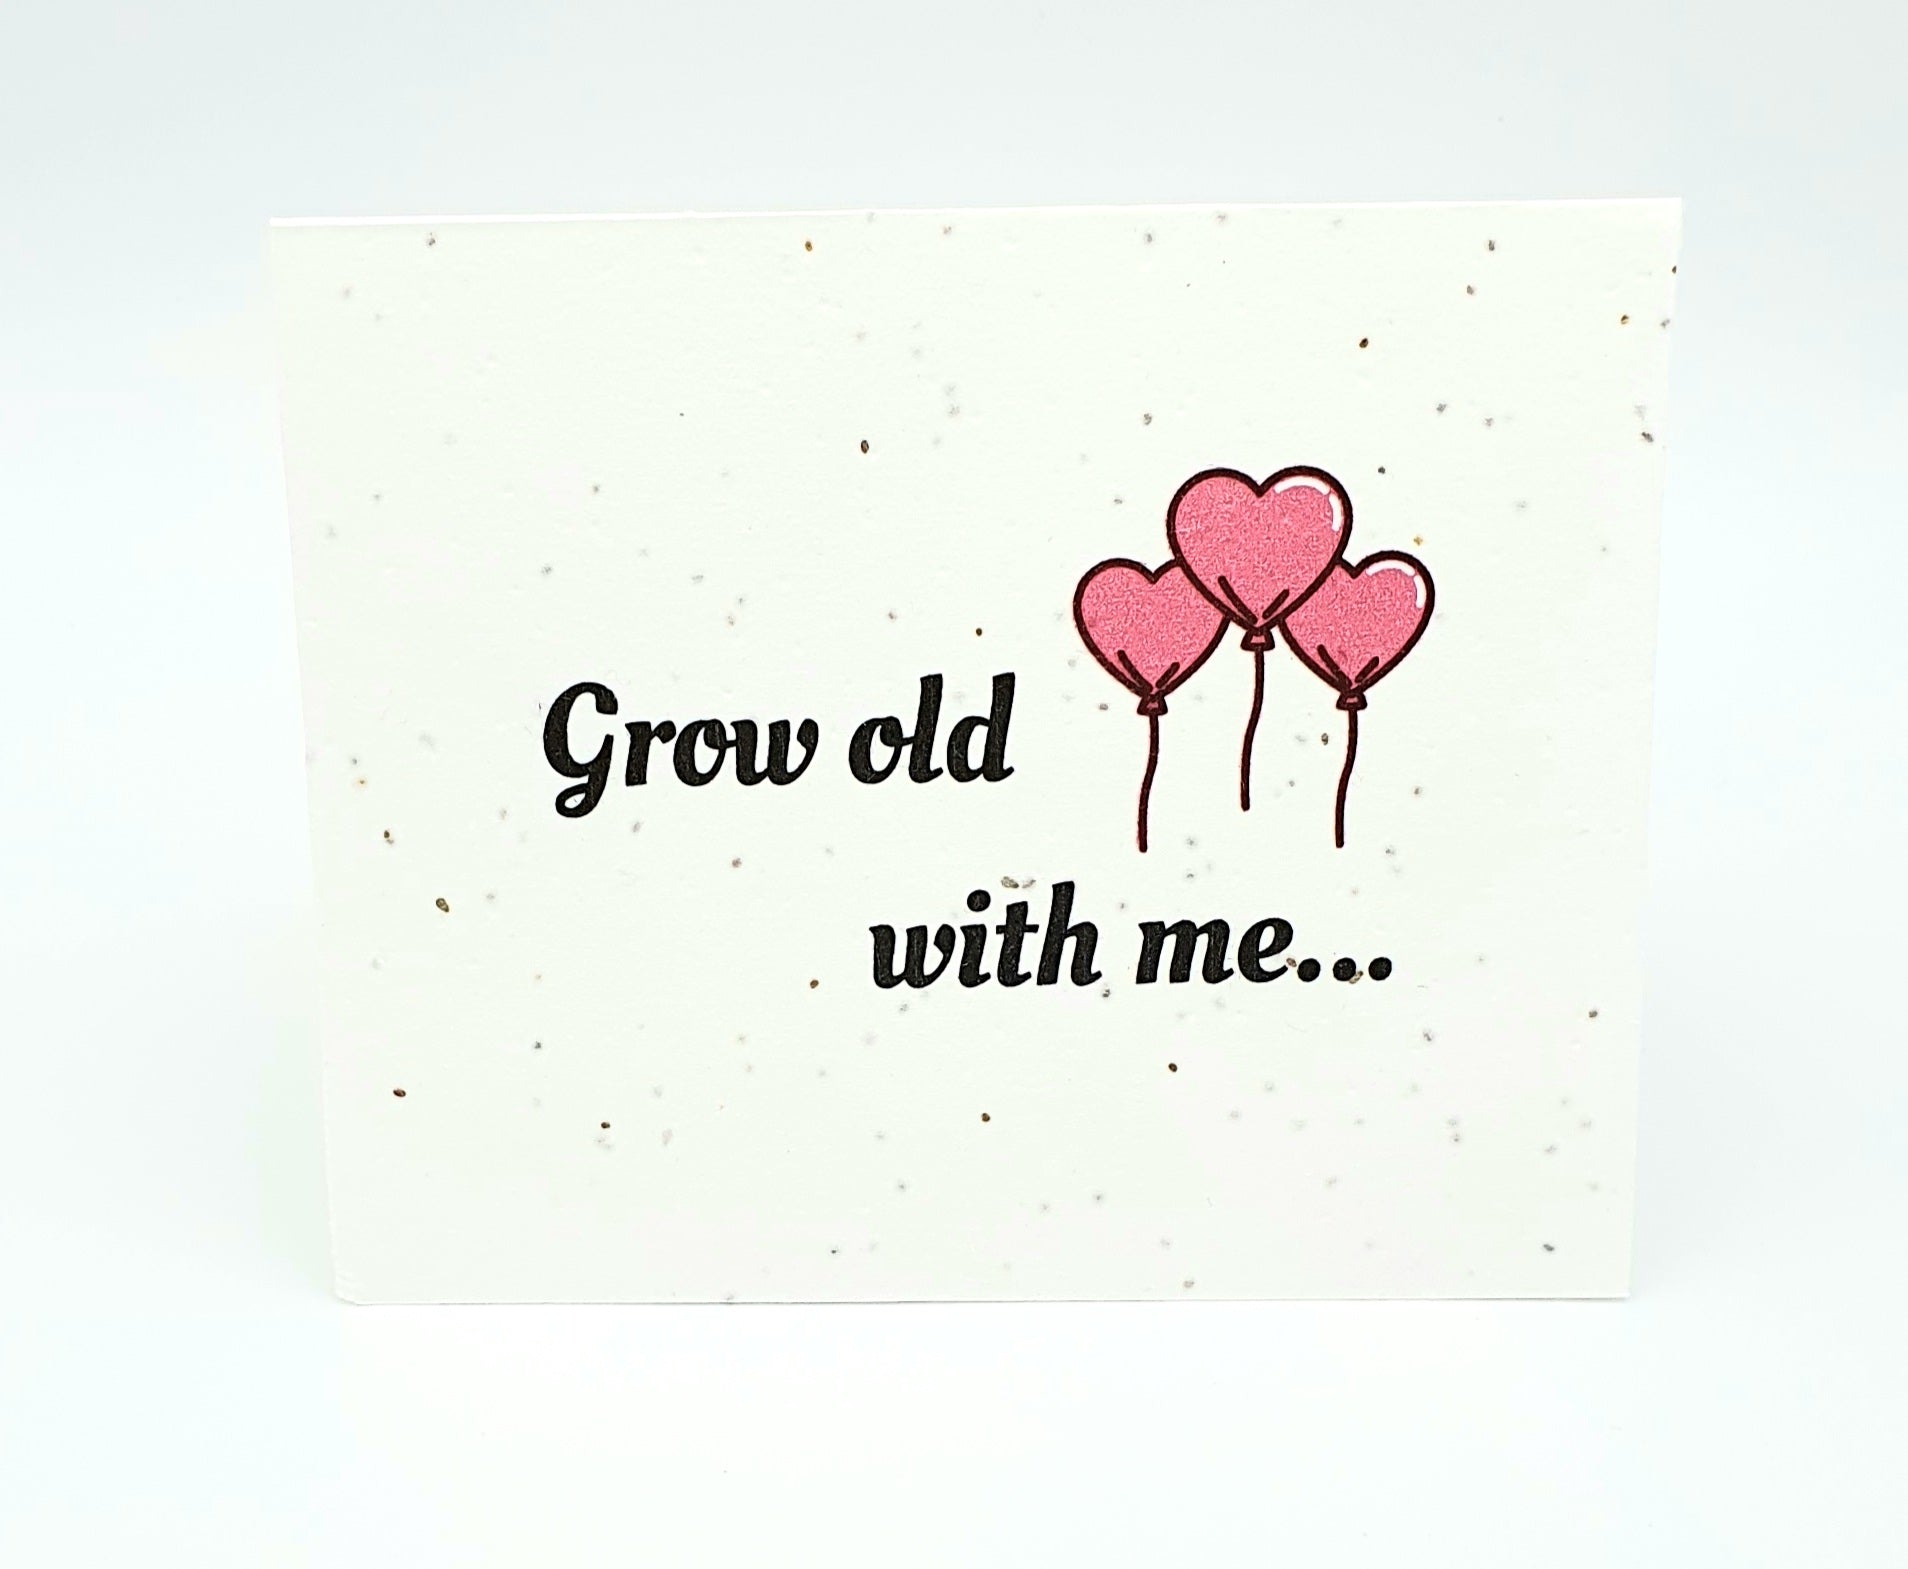 Plantable seed card with "Grow old with me..." and 3 pink heart balloons.